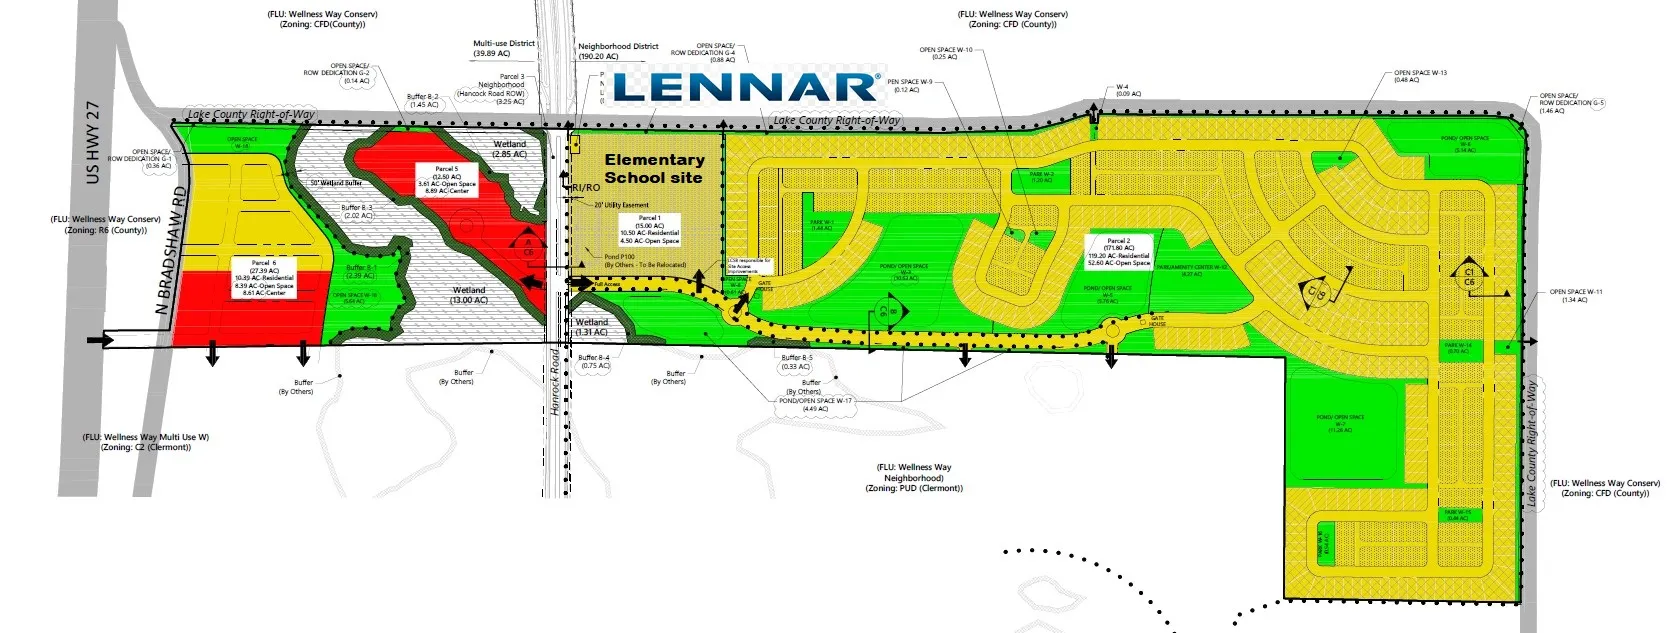 map of wellness way with lennar homes highlighted